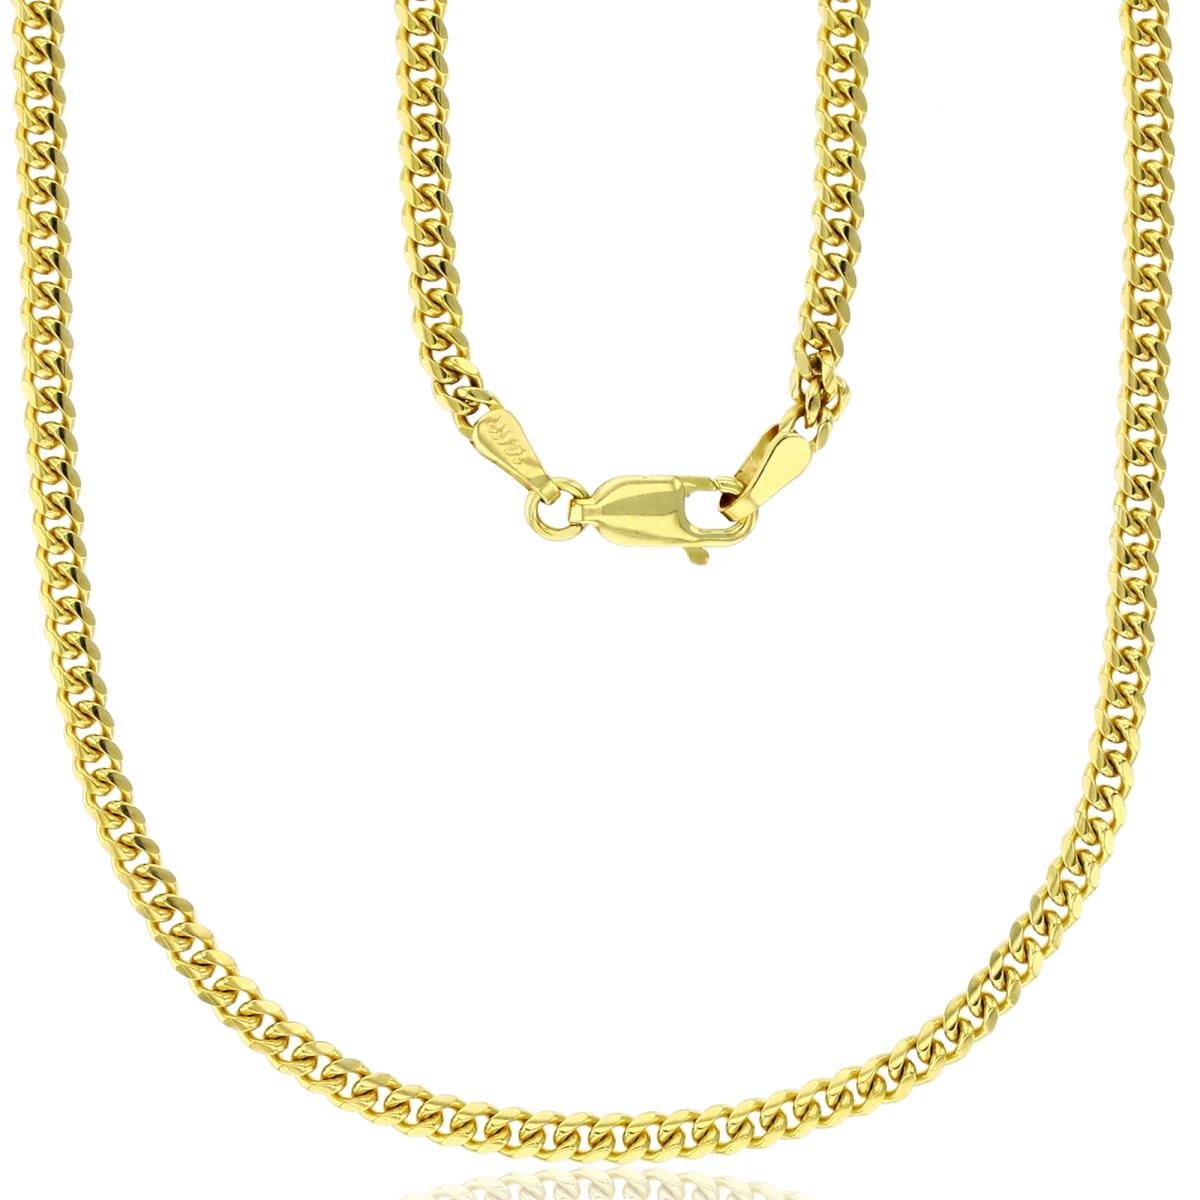 14K Yellow Gold 2.85mm 16" Solid Miami Cuban 080 Chain with Lobster Lock